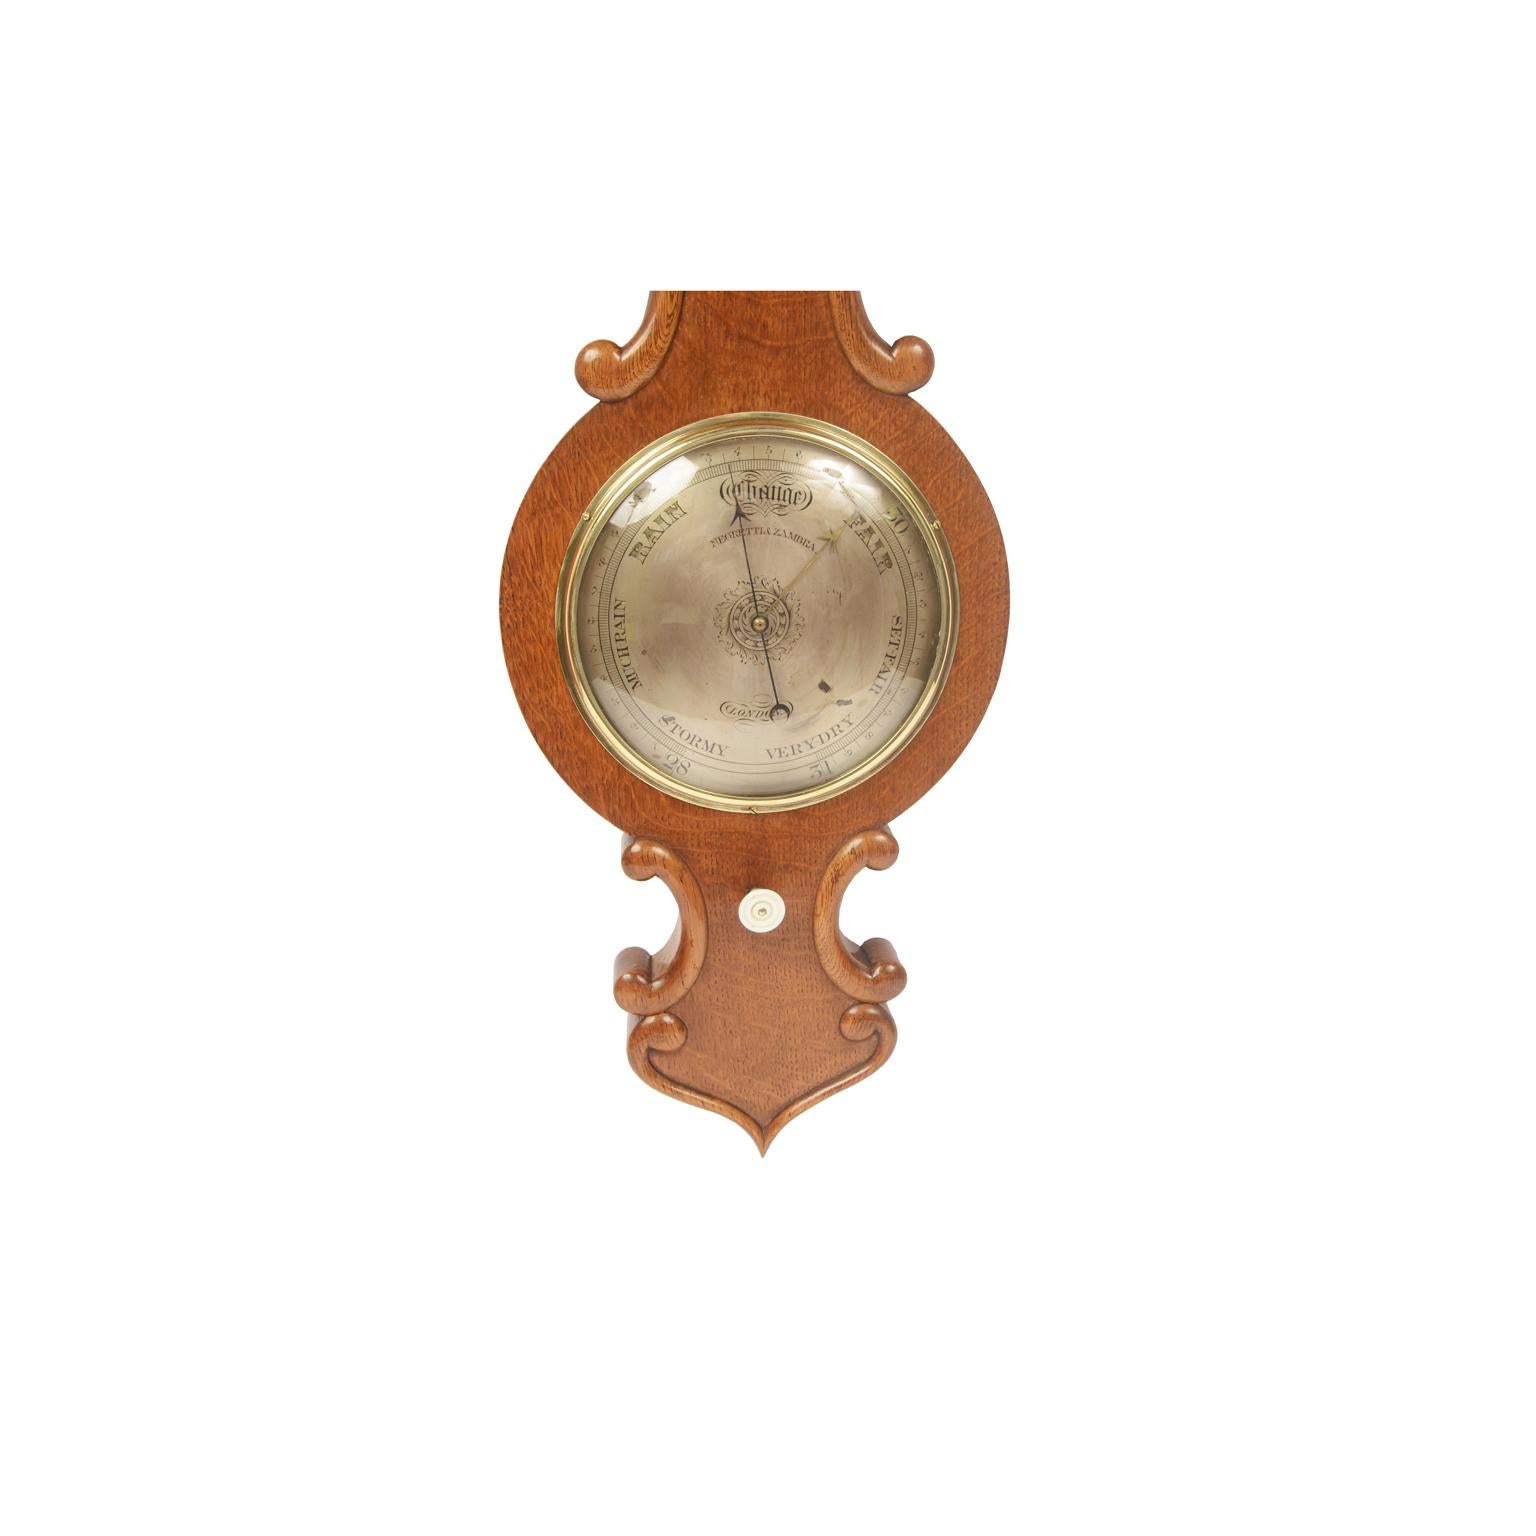 Torricellian barometer of oak wood, signed Negretti & Zambra London from the second half of the 19th century, complete with reading vernier for checking the pressure variation and thermometer. 
Height 98 cm - 10.6 inches, width 27 cm - 38.5 inches,